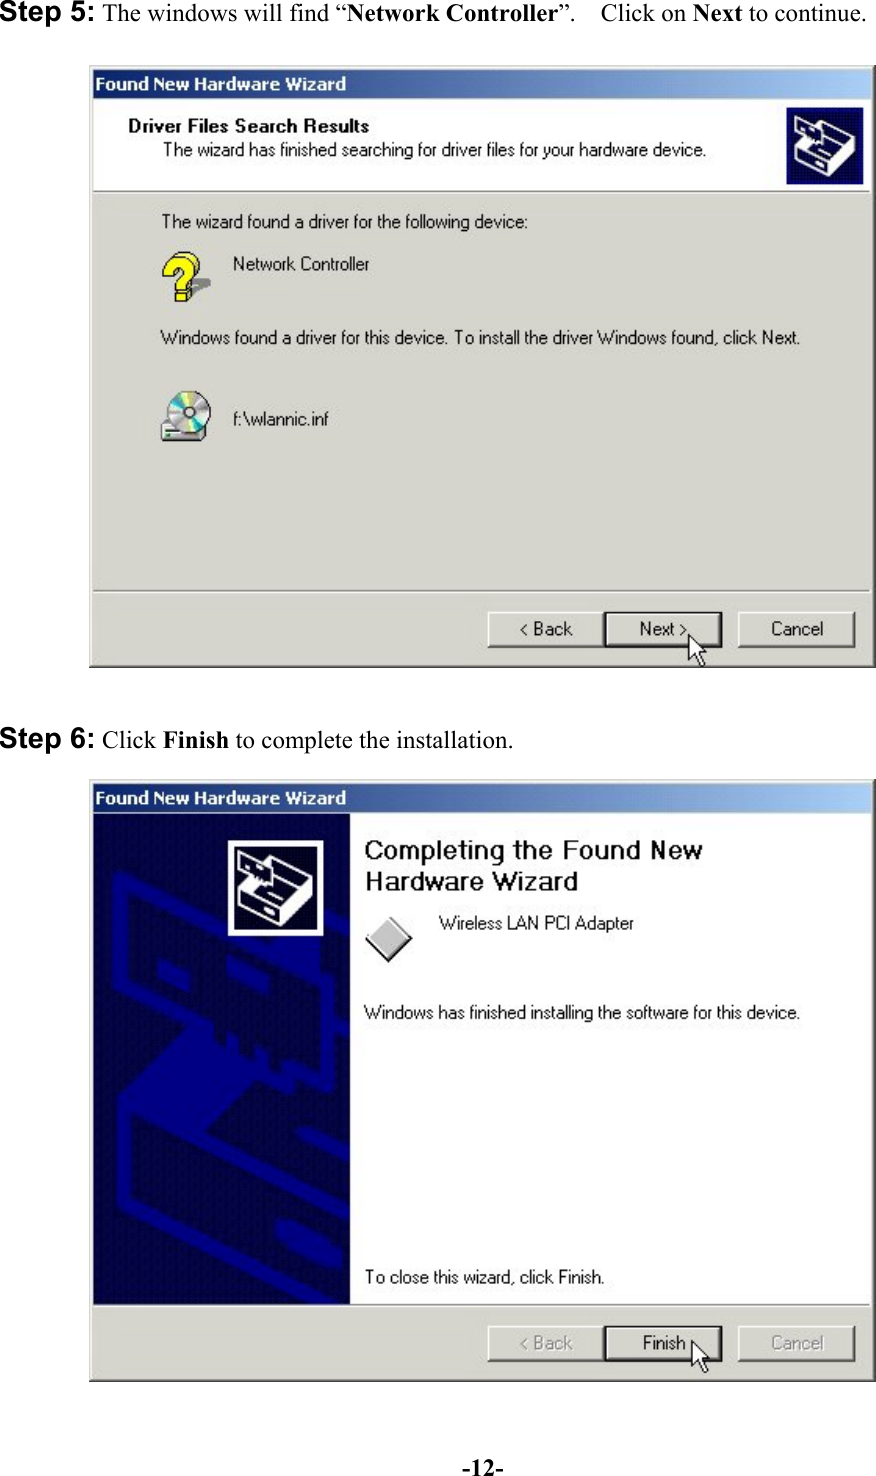 -12-Step 5: The windows will find “Network Controller”.  Click on Next to continue.Step 6: Click Finish to complete the installation.